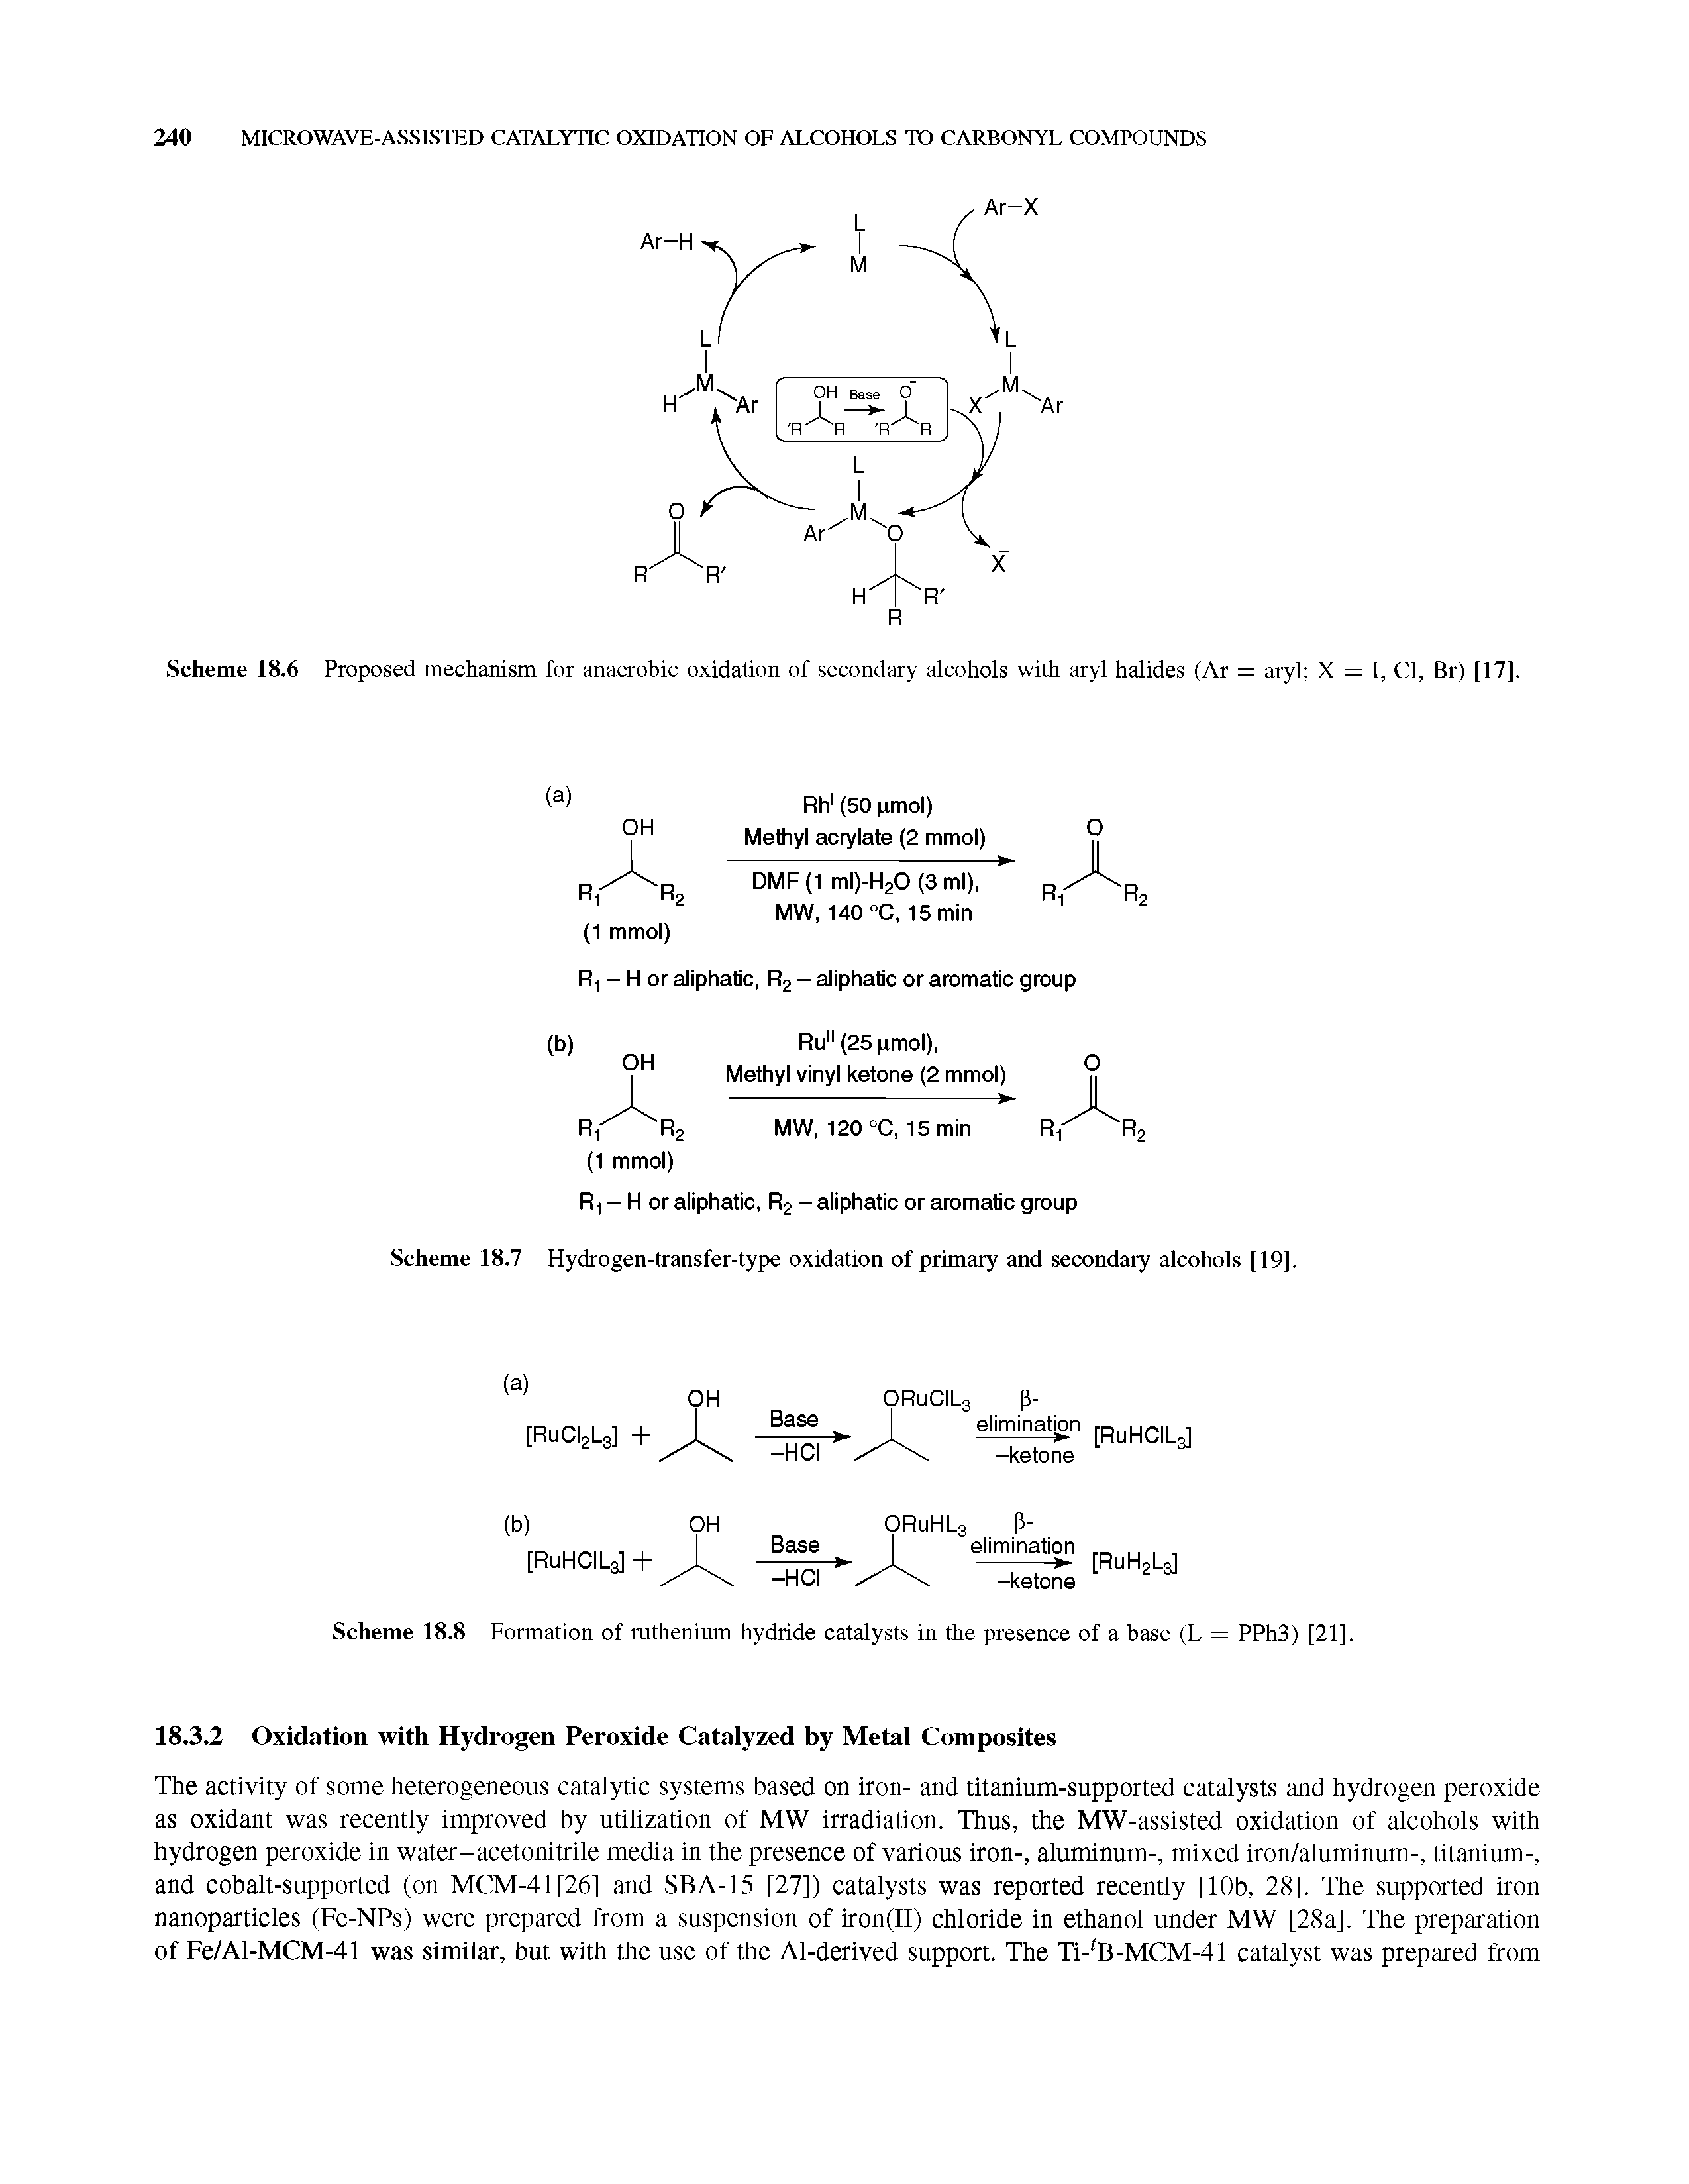 Scheme 18.6 Proposed mechanism for anaerobic oxidation of secondary alcohols with aryl halides (Ar = aryl X = 1, Cl, Br) [17],...